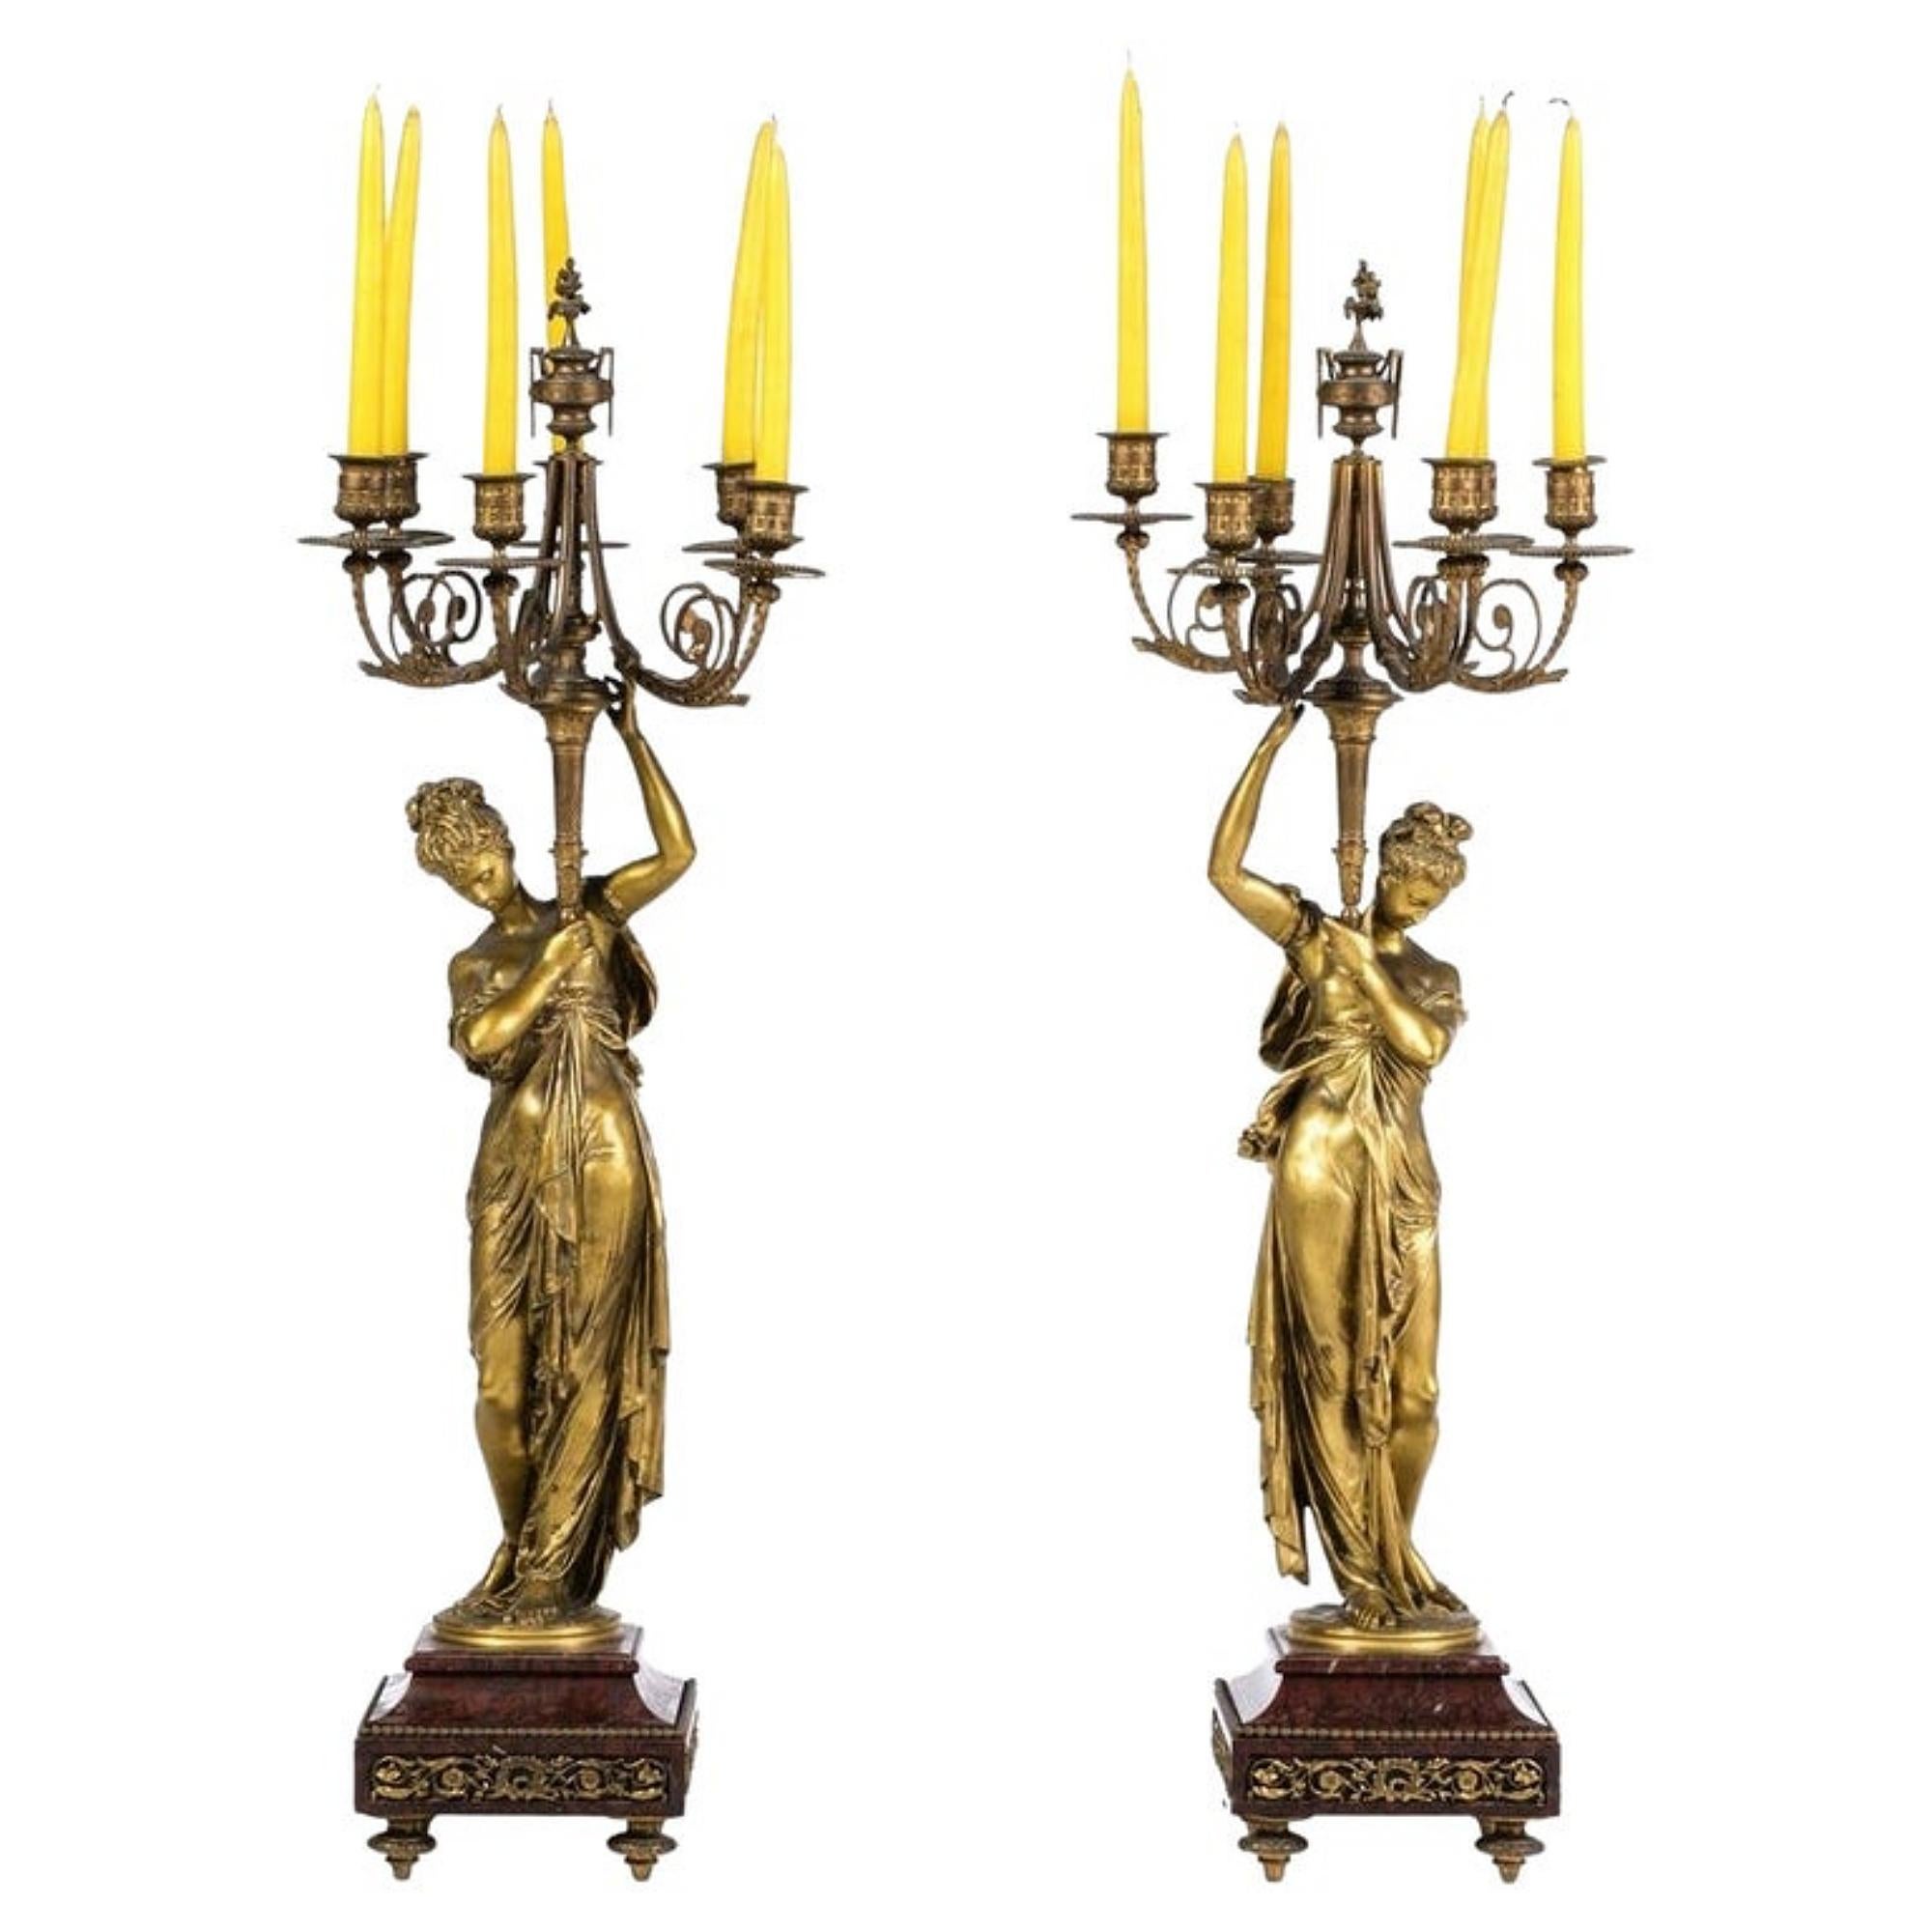 Albert Carrier-Belleuse Pair of French Five-Fire Candelabra, 19th Century For Sale 8